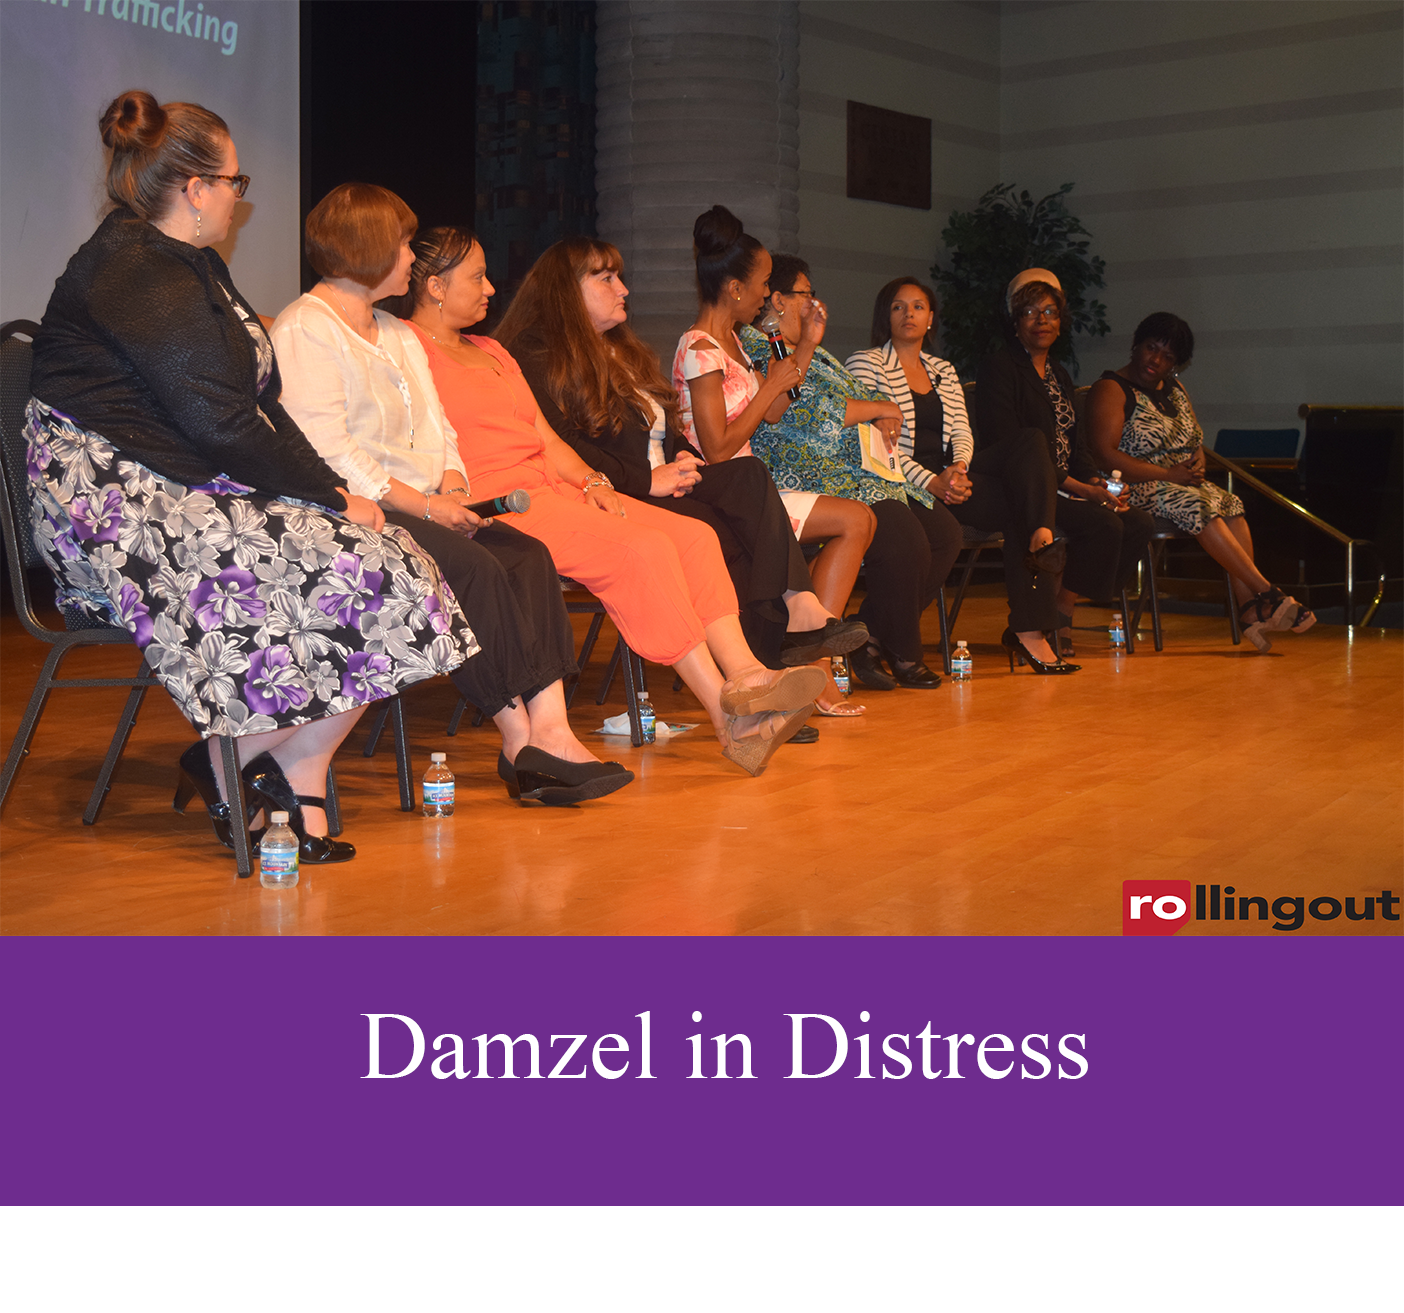 Damzel in Distress: The S.H.A.U.N. Foundation for Girls